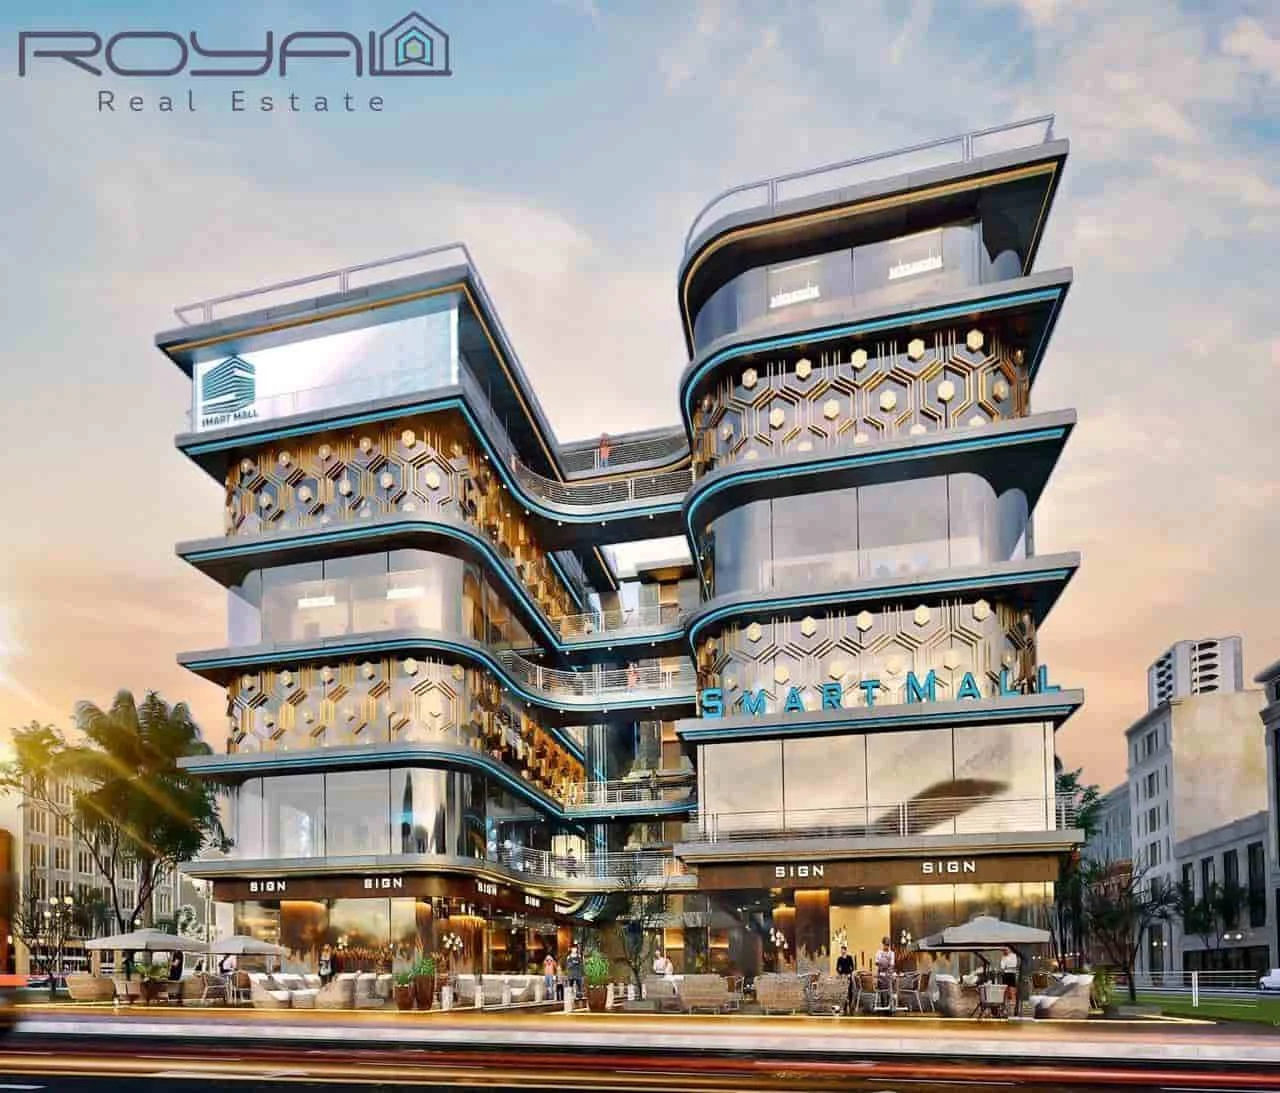 5 rooms administrative units for sale in Smart Mall project